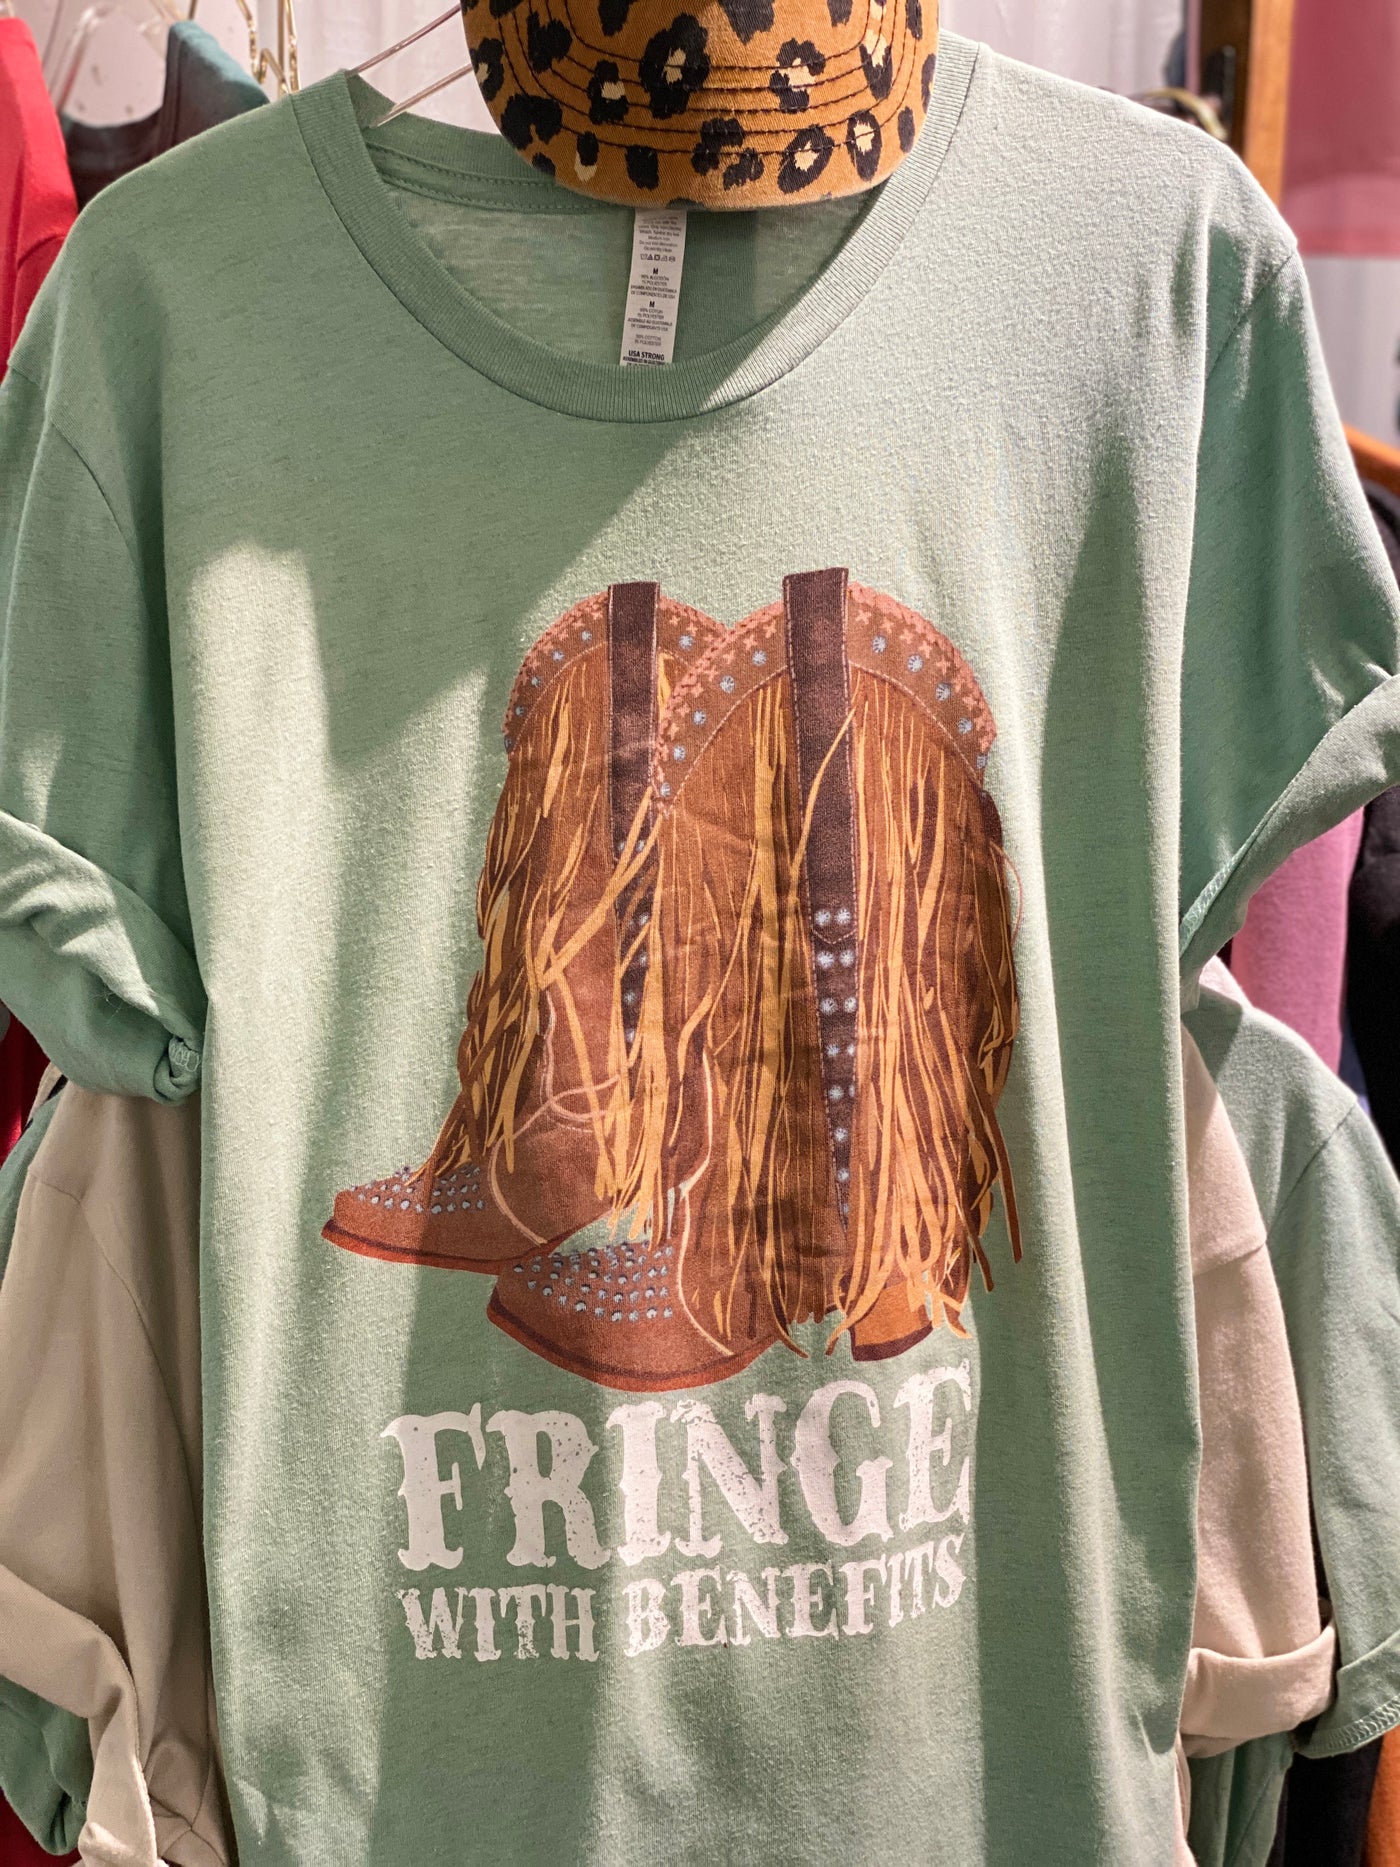 Green tee with graphic. The graphic on the tee is a pair of cowboy boots adorned with rhinestones and fringe and the words fringe with benefits in a western font under the boots.